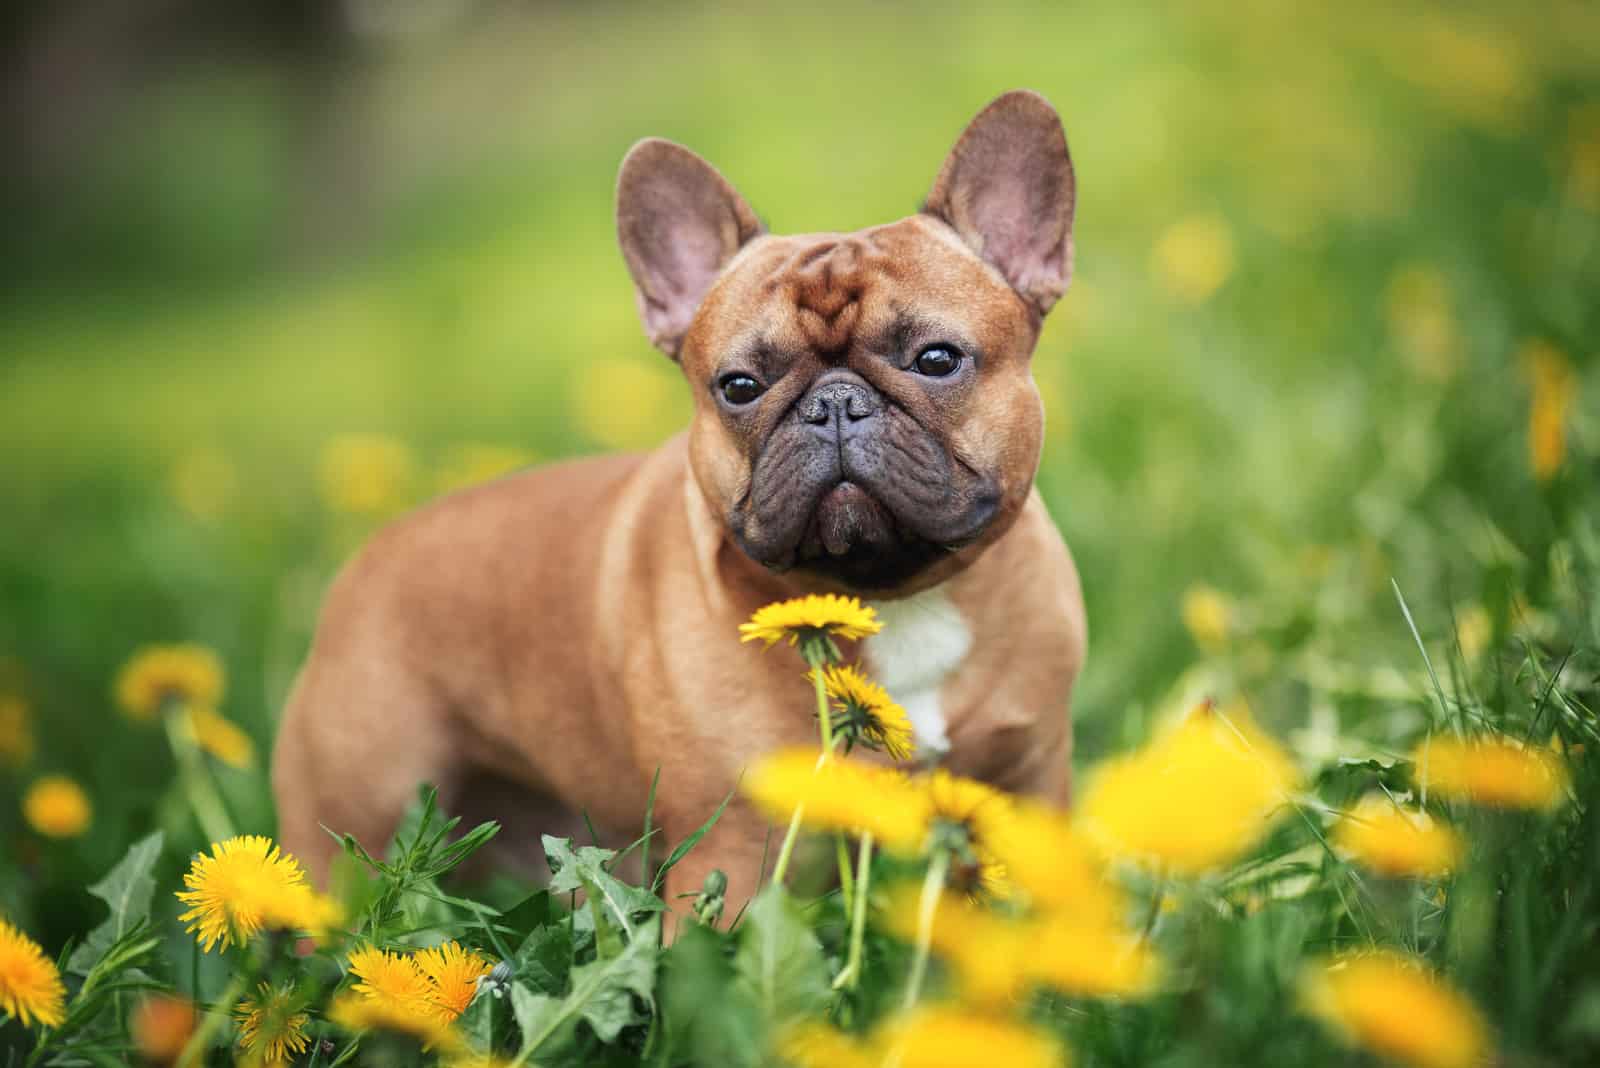 The French Bulldog stands in flowers